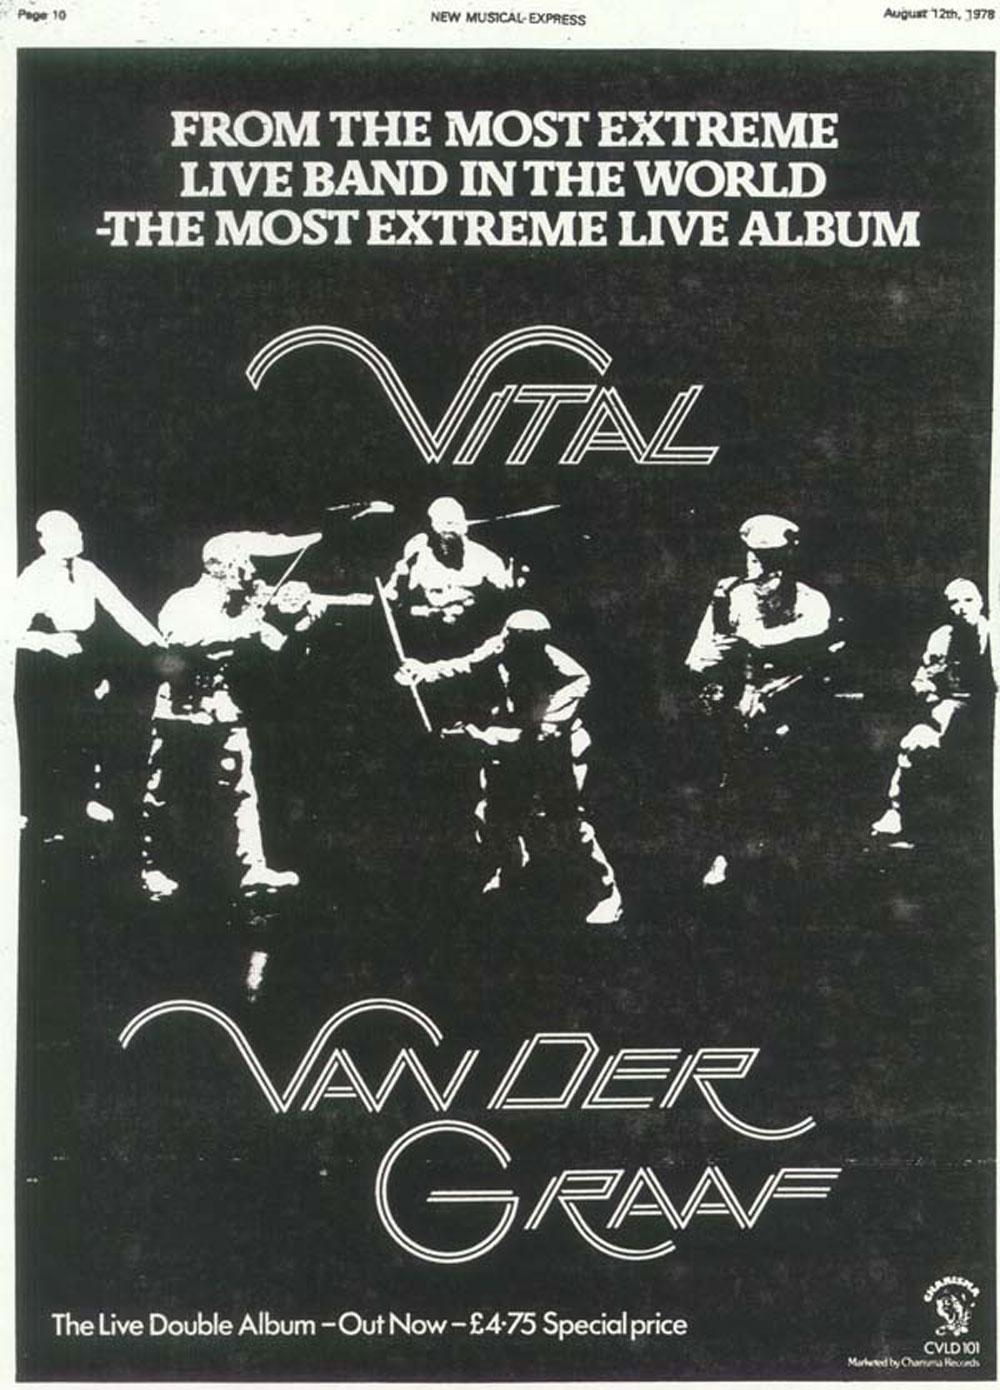 ORGAN THING: From the most extreme live band in the world, the most extreme live album, Van Der Graaf’s Vital reissued…